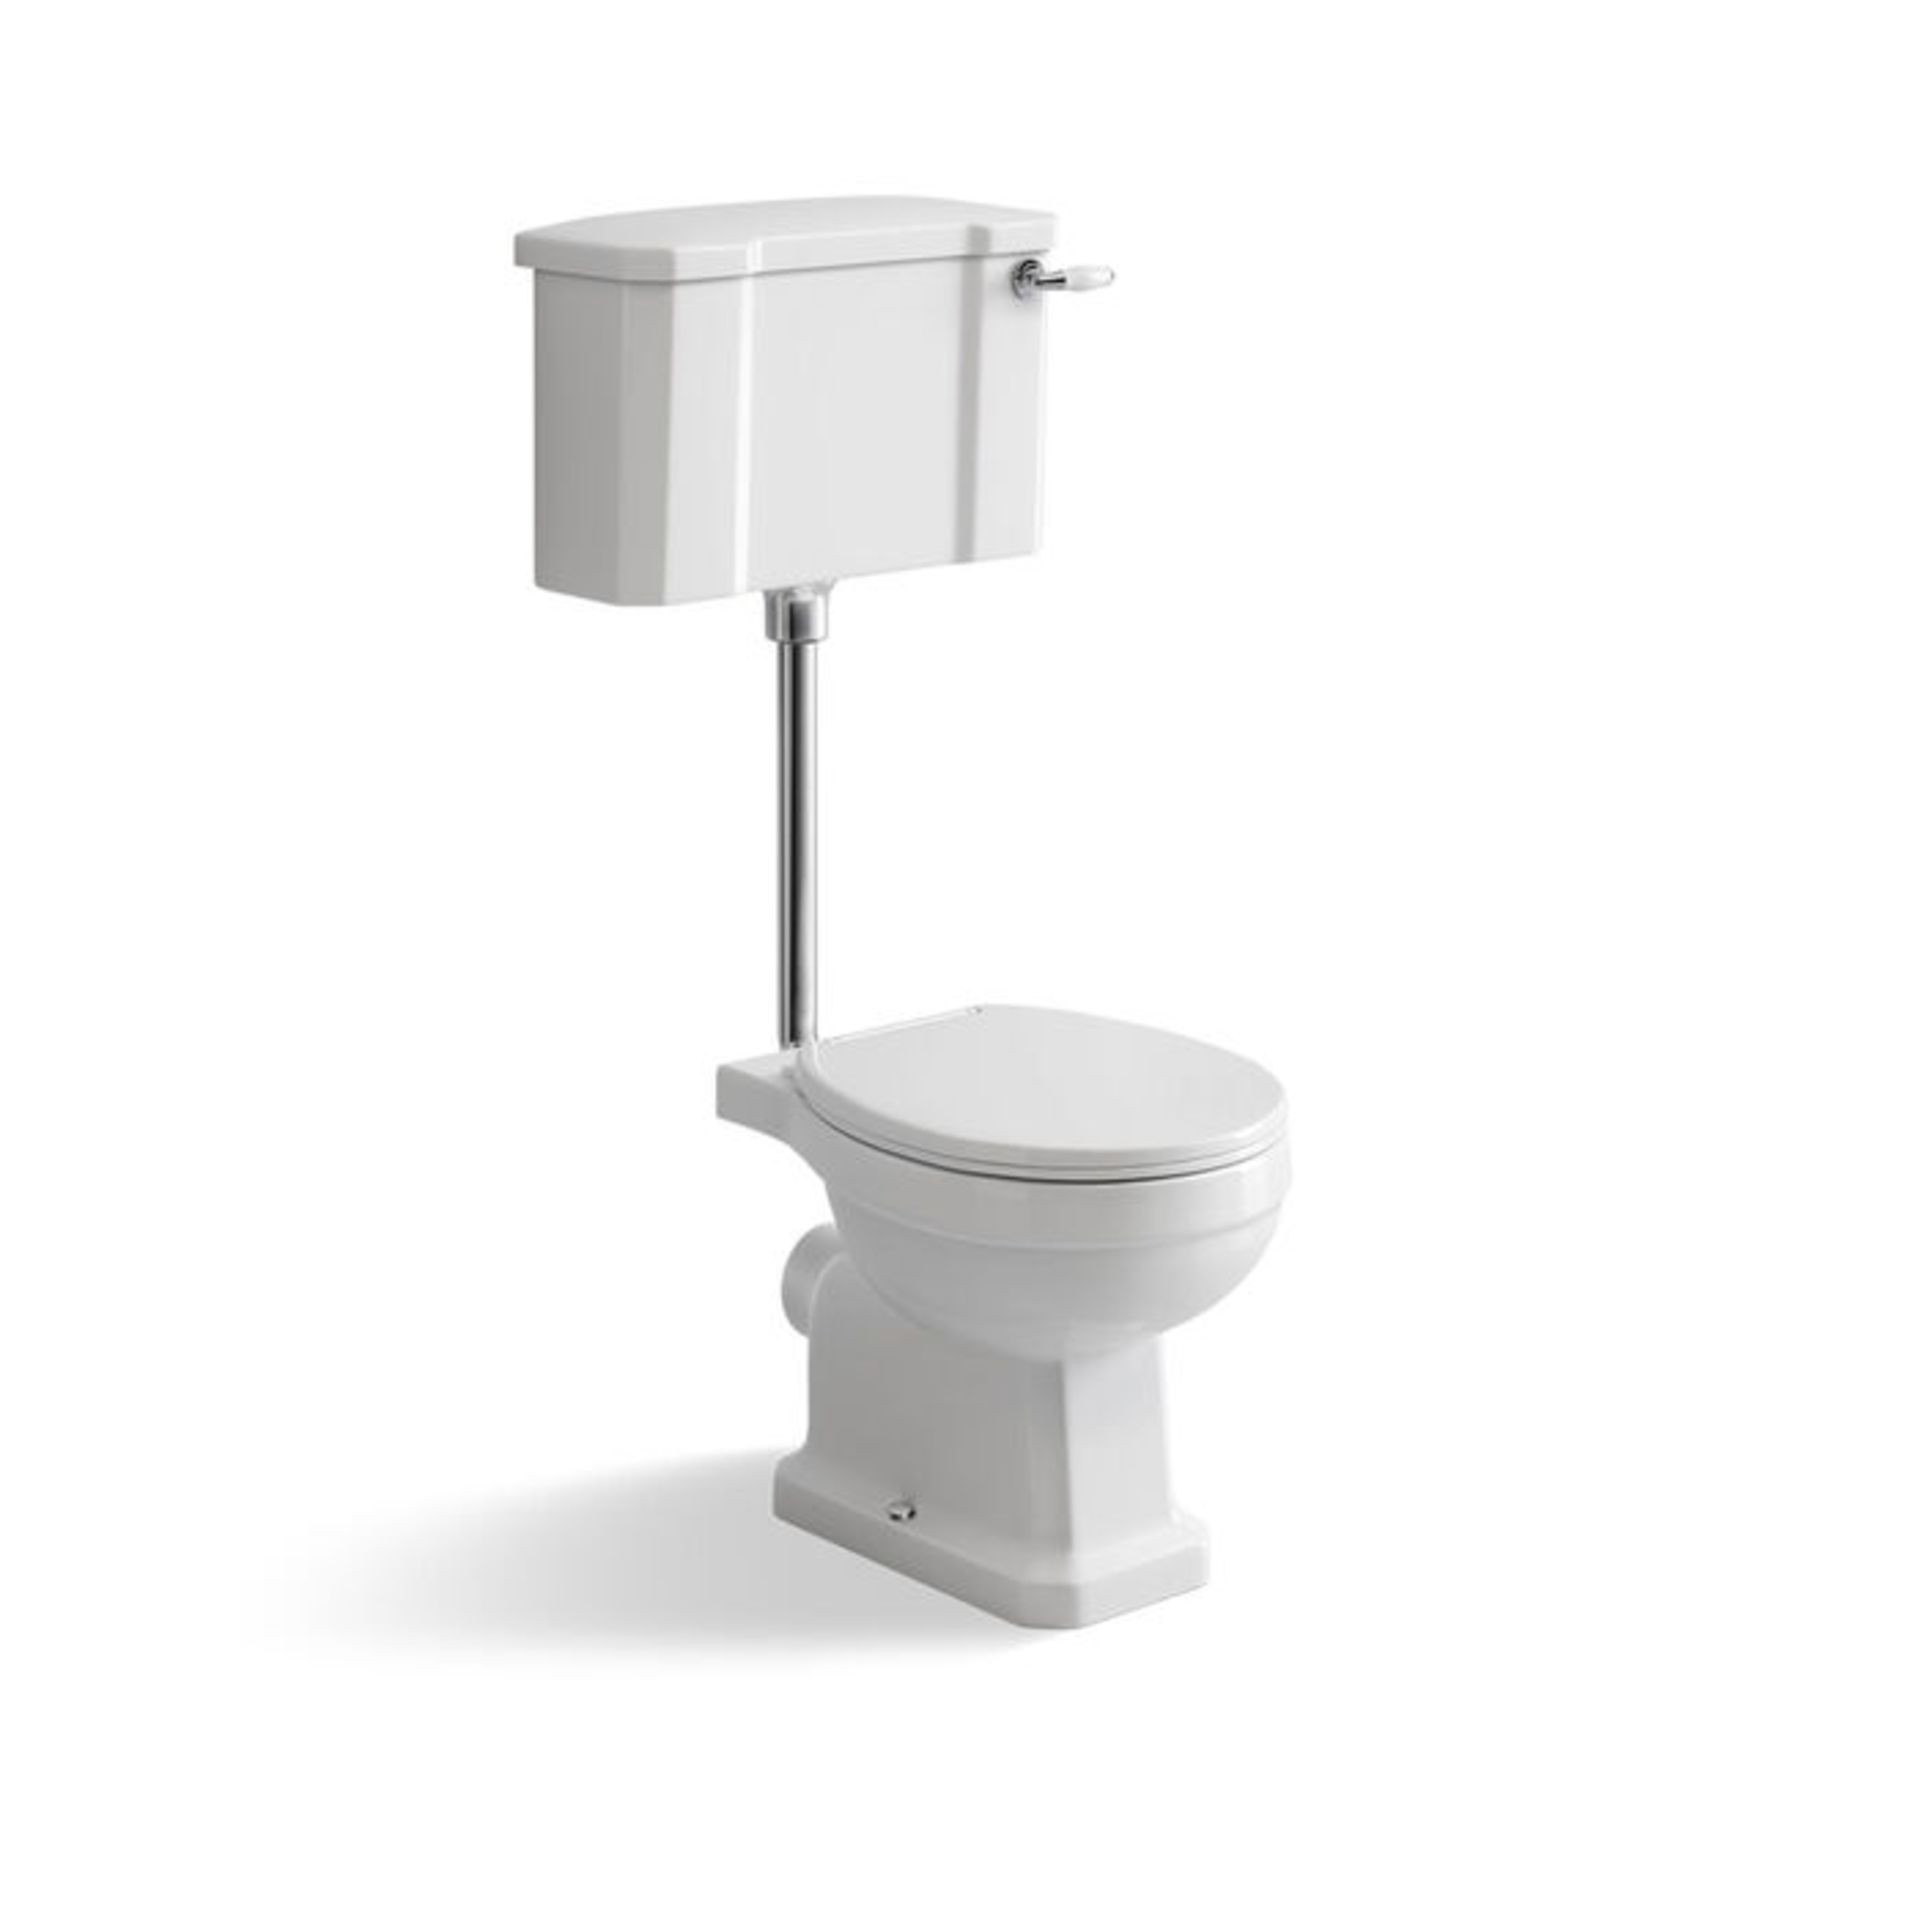 NEW & BOXED Tradiational Cambridge Low-Level Cistern Toilet- With Luxury Soft Close Seat. CCG62... - Image 4 of 4